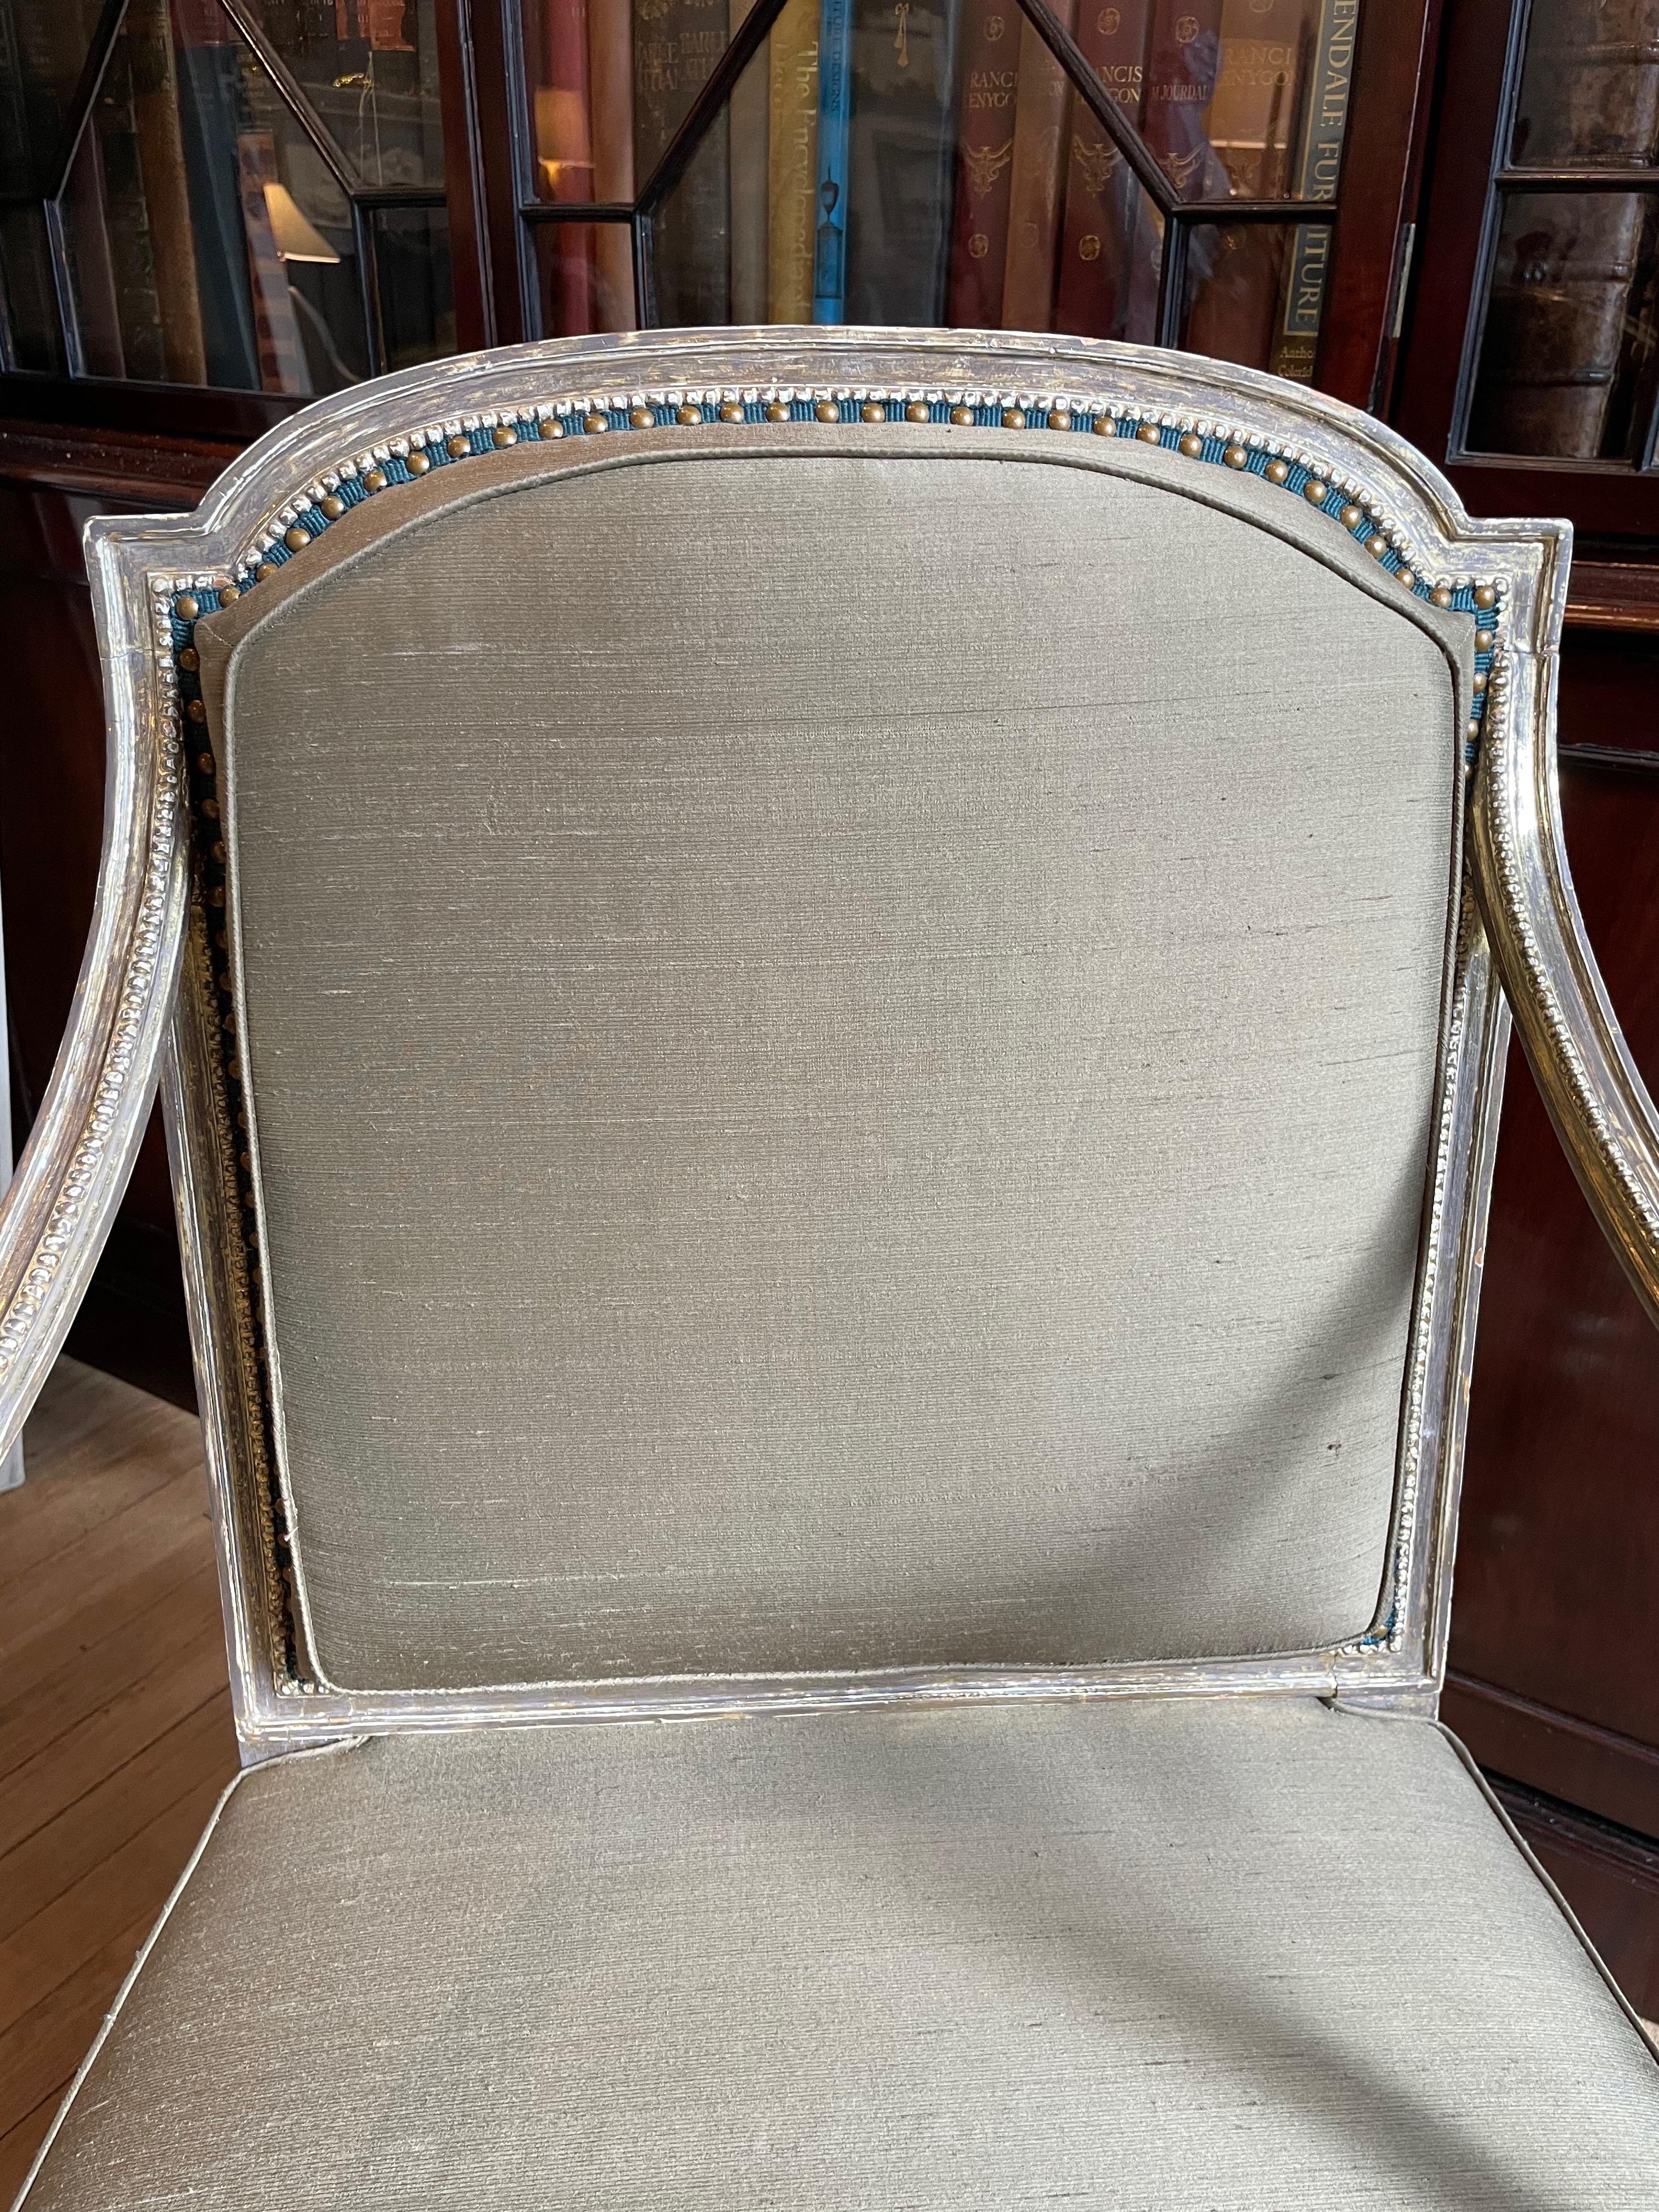 Sheraton giltwood armchair
English, circa 1785
Measures: Back height: 36 in. Width: 24 in. Depth: 23 in. Seat height: 17 in.

2199.
 